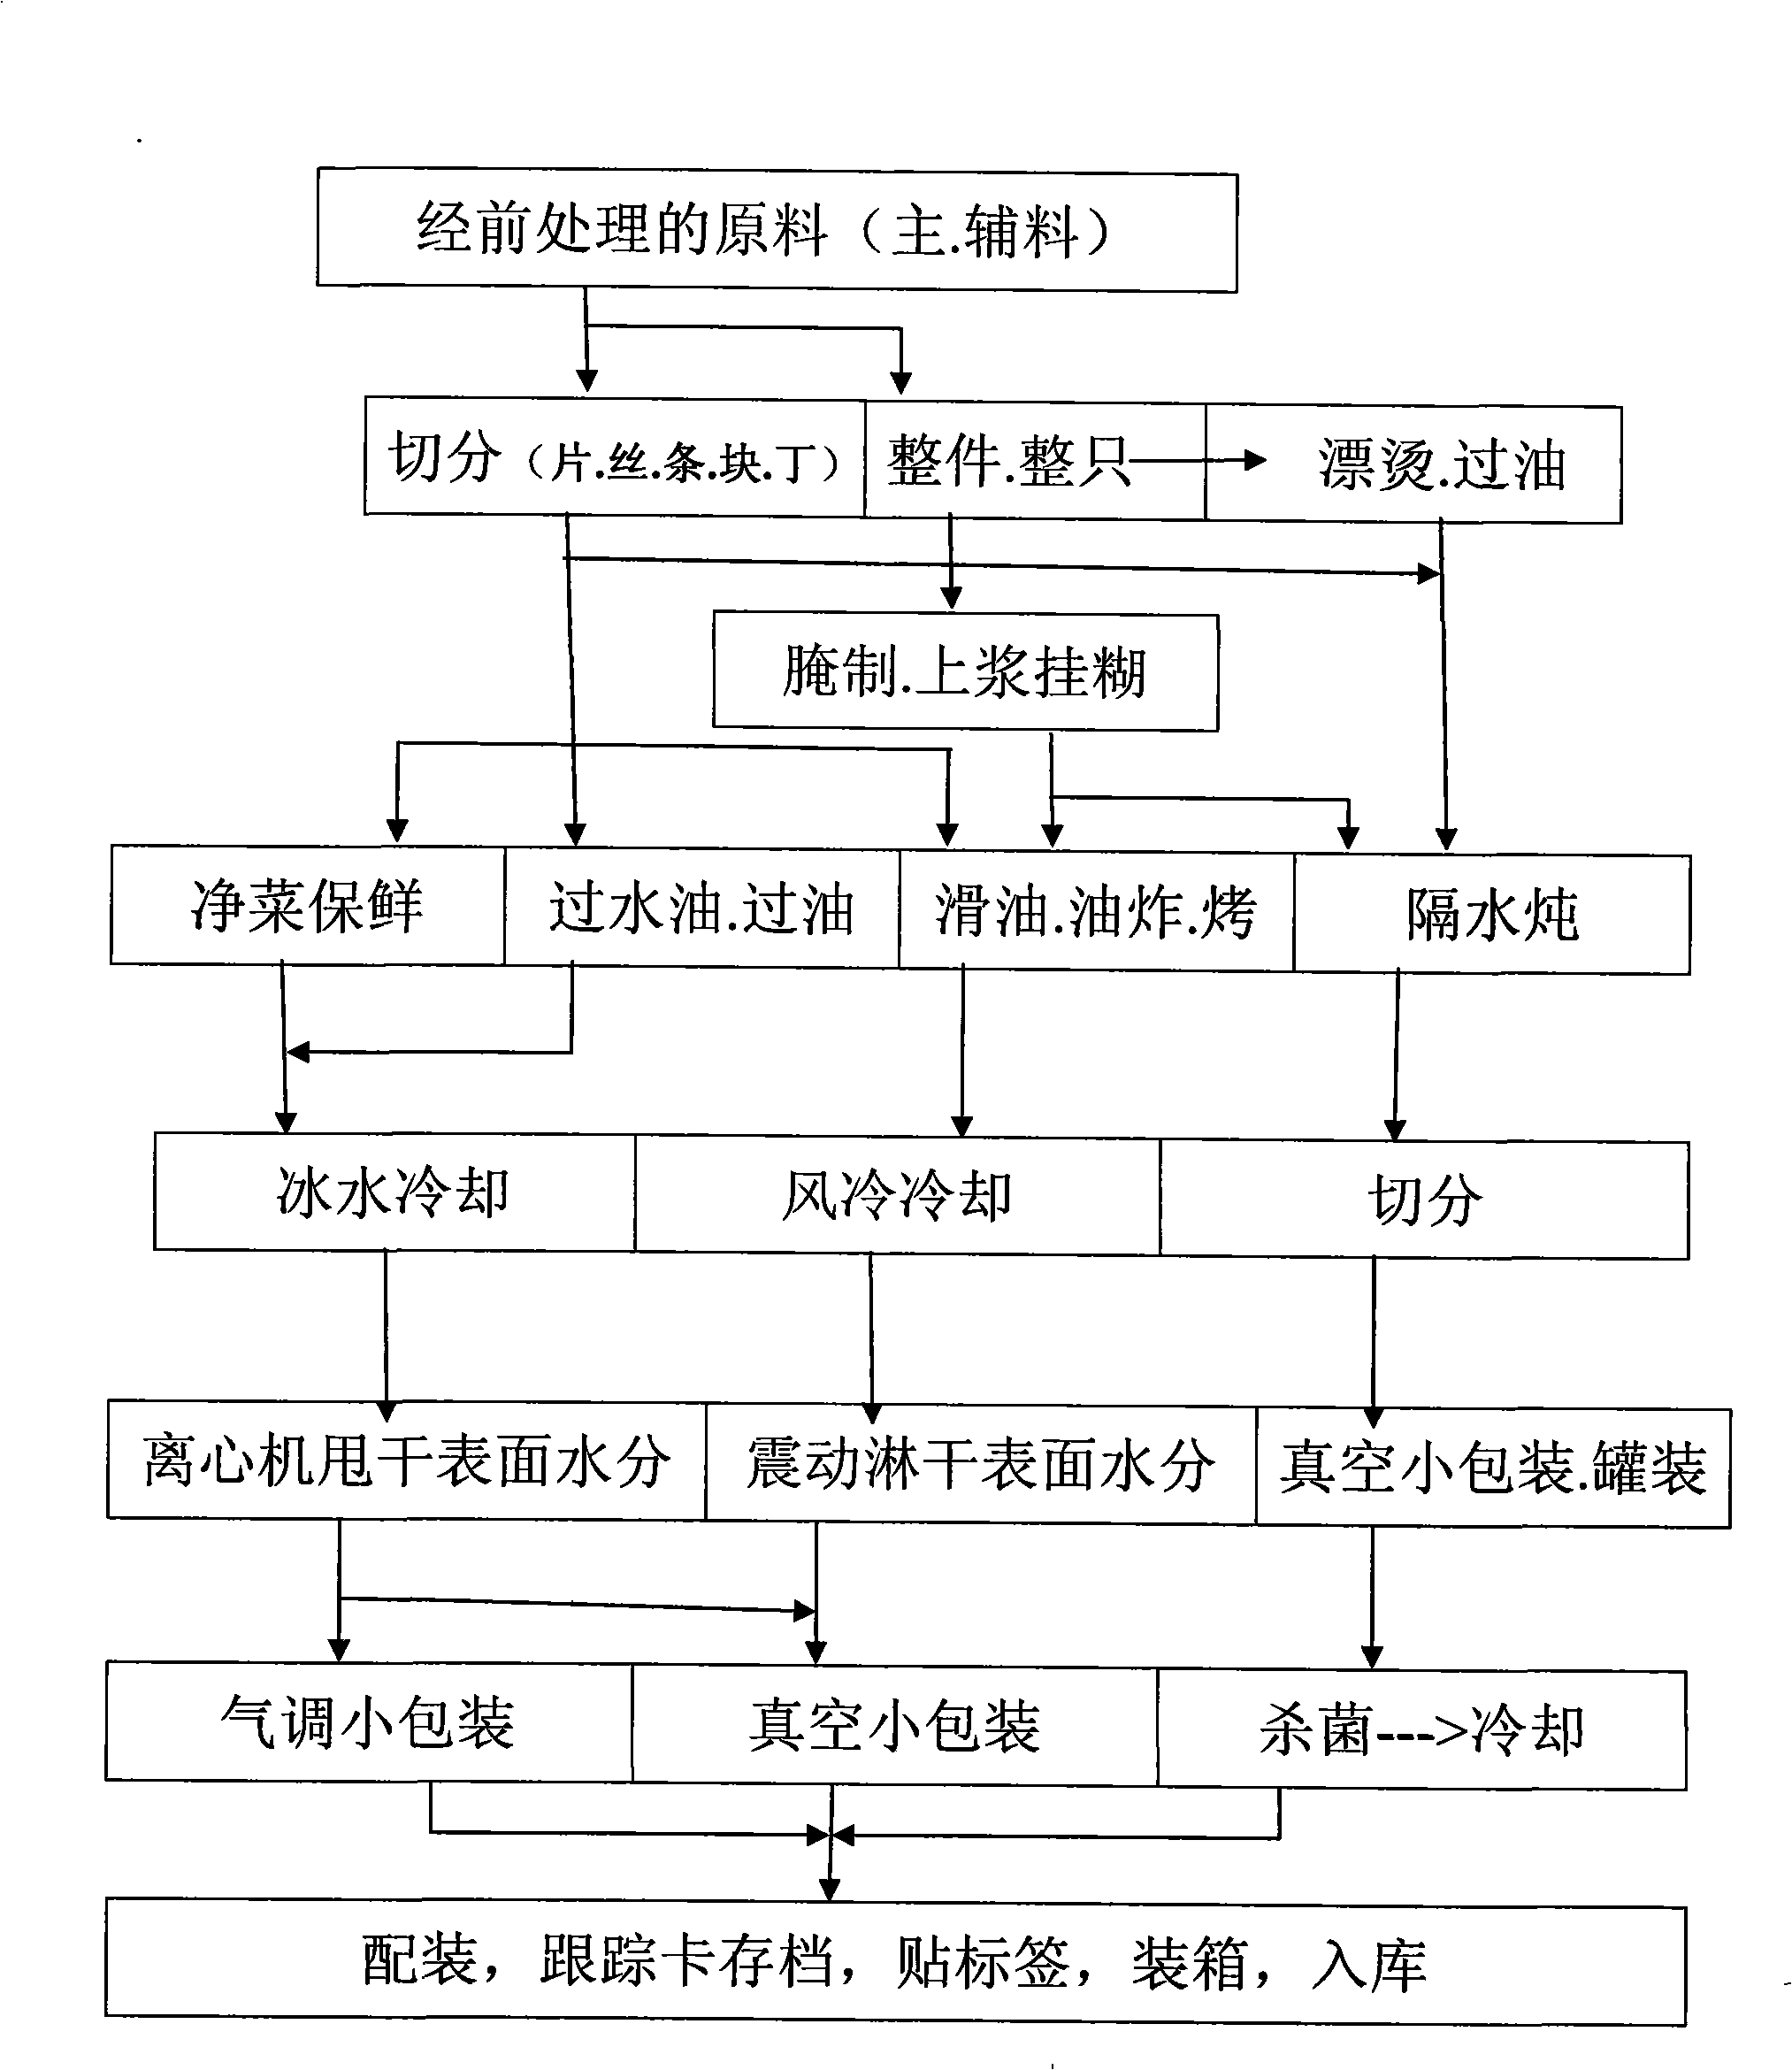 Method for preparing beverage and food suitable for microwave buffet dinner